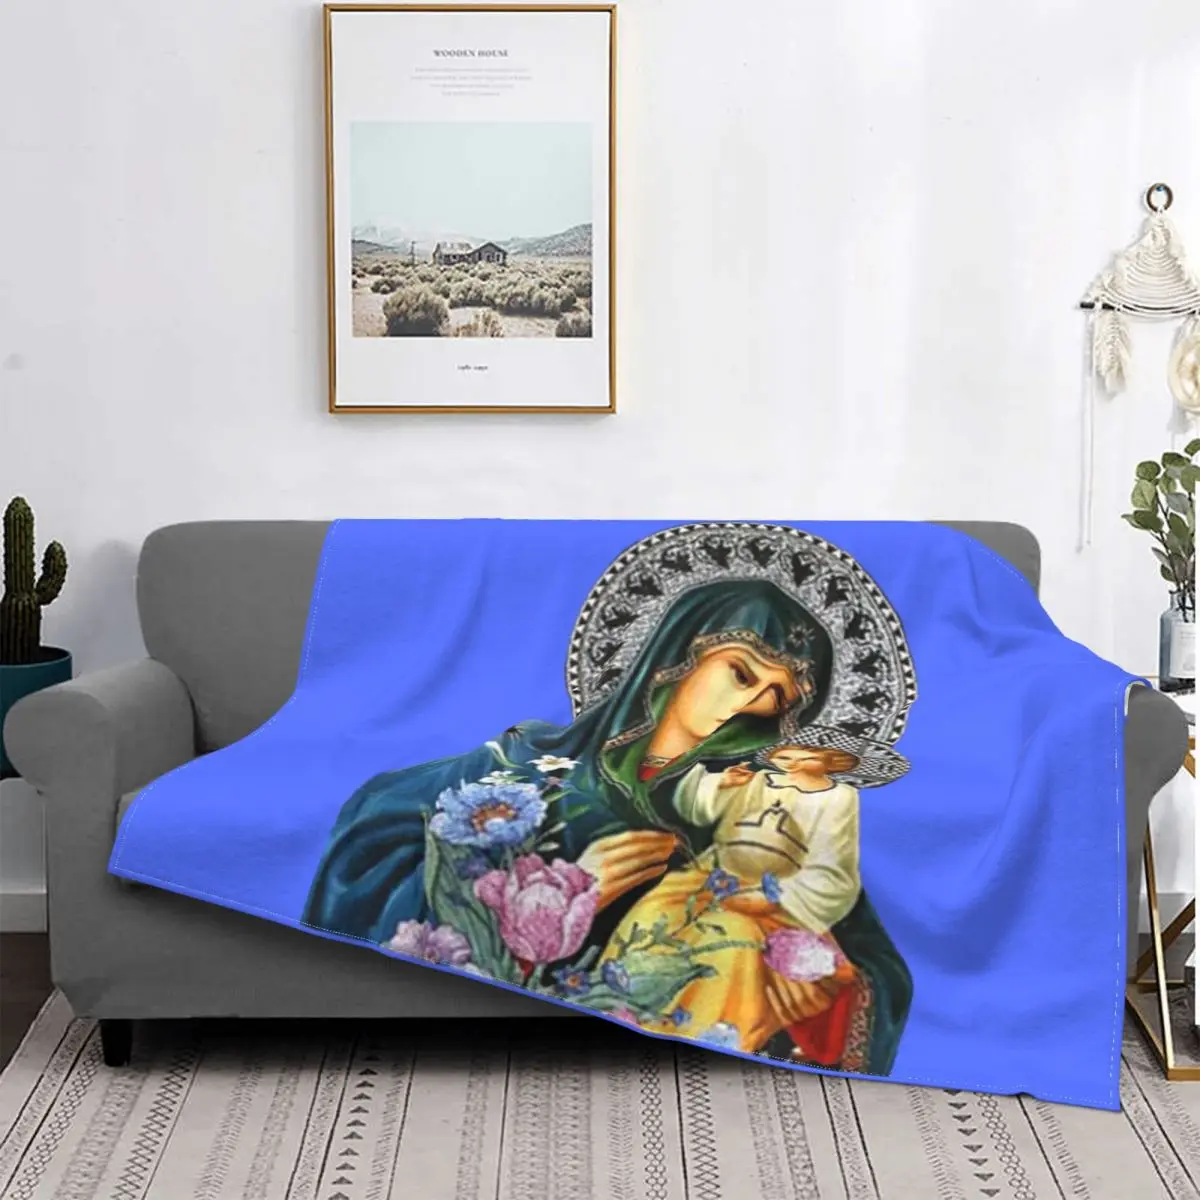 

The Mother Of God Virgin Mary Knitted Blankets Flannel religious orthodox Lightweight Thin Throw Blankets for Home Couch Bed Rug